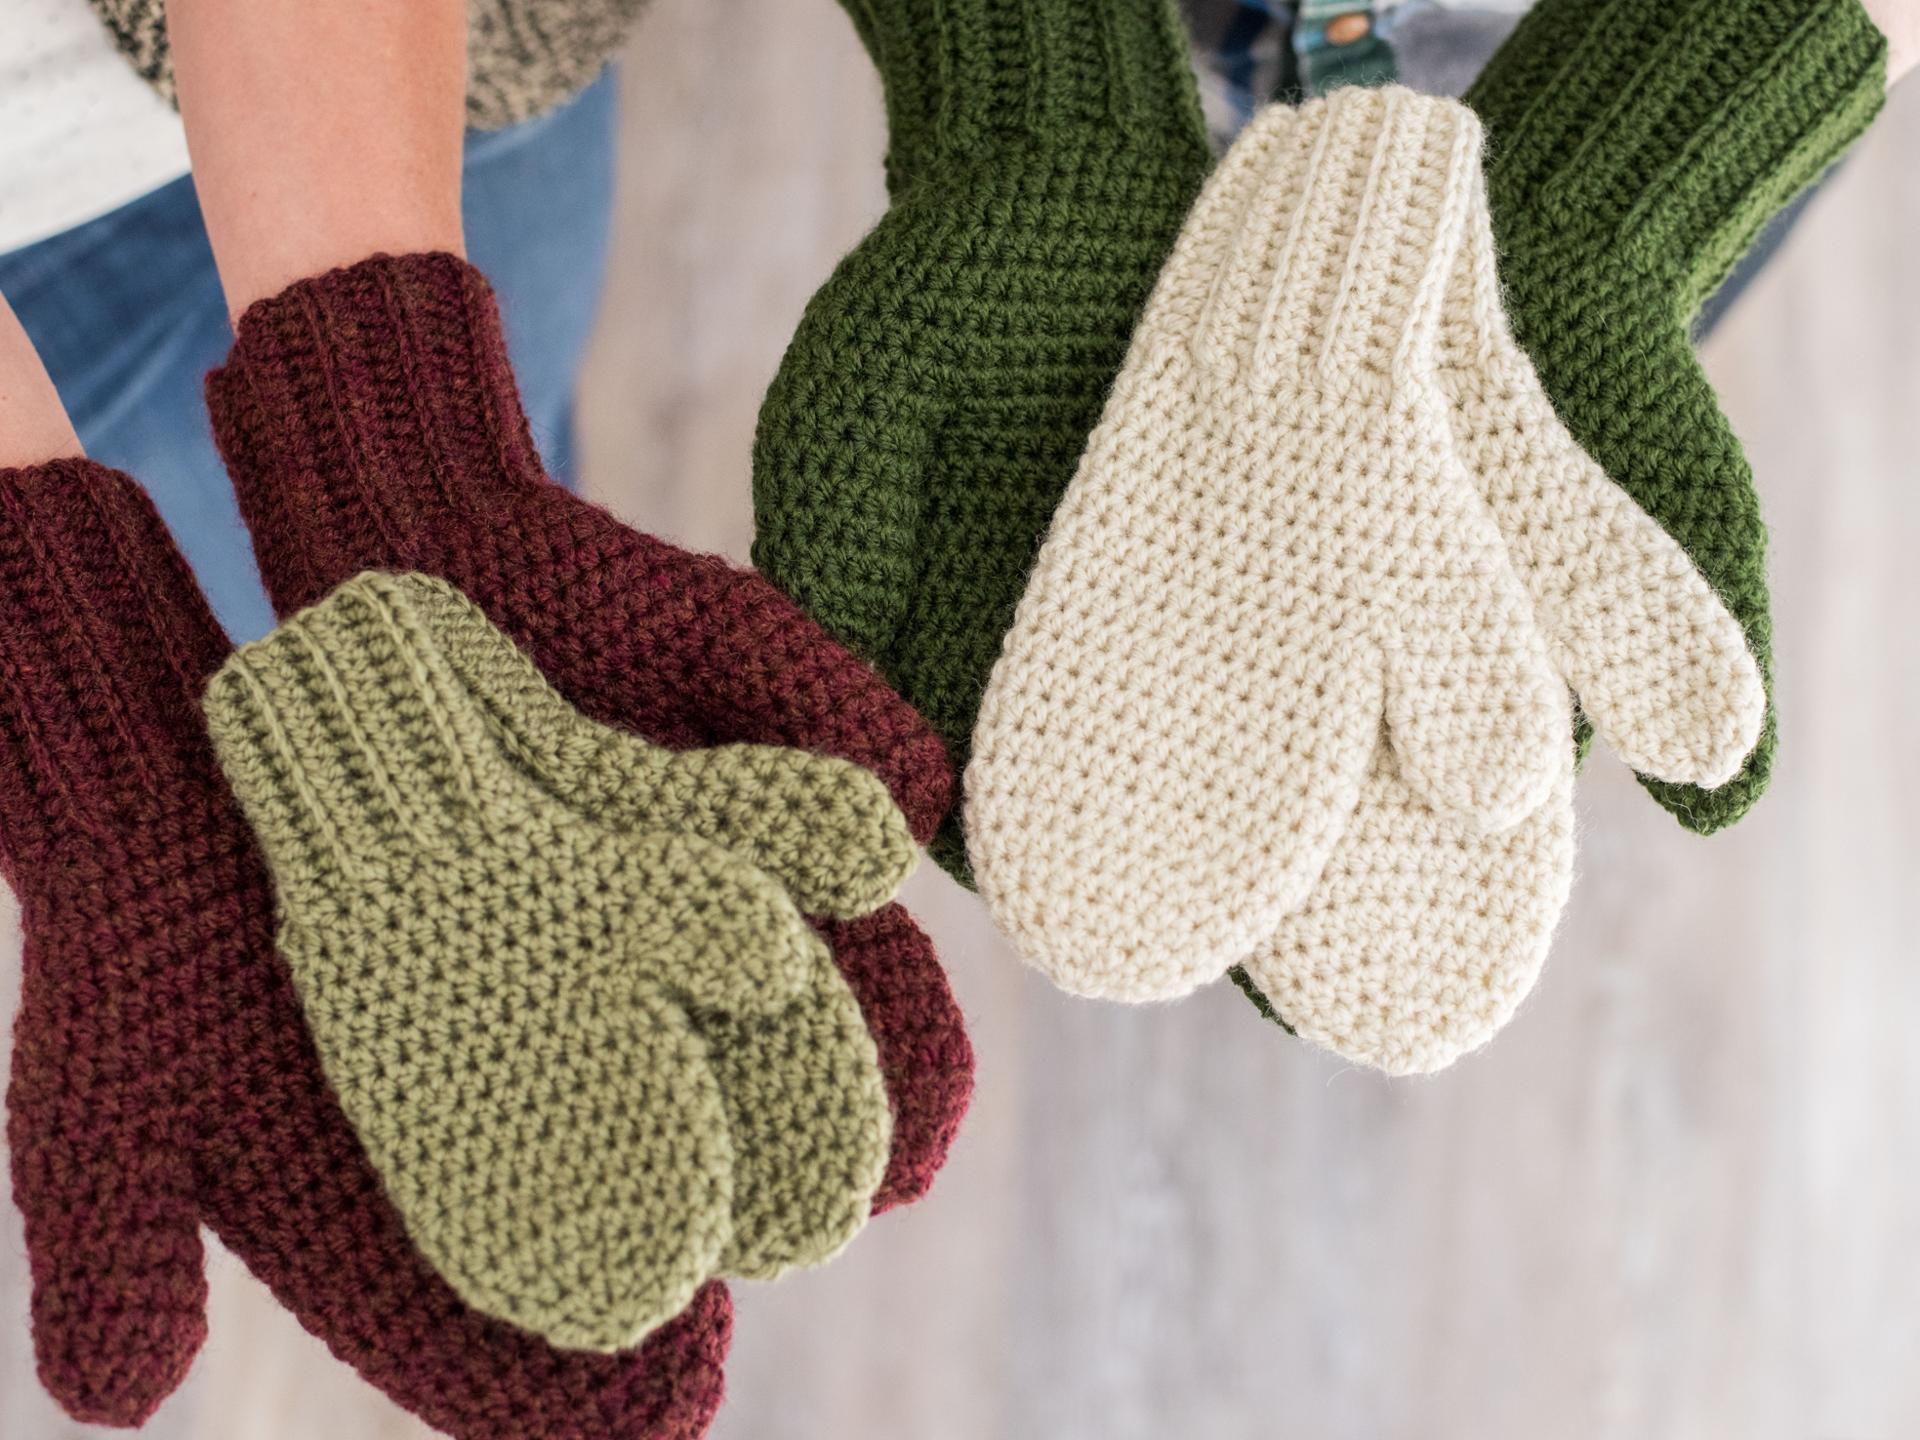 10 Free Crochet Mittens Patterns for Everyone - Crochet For You